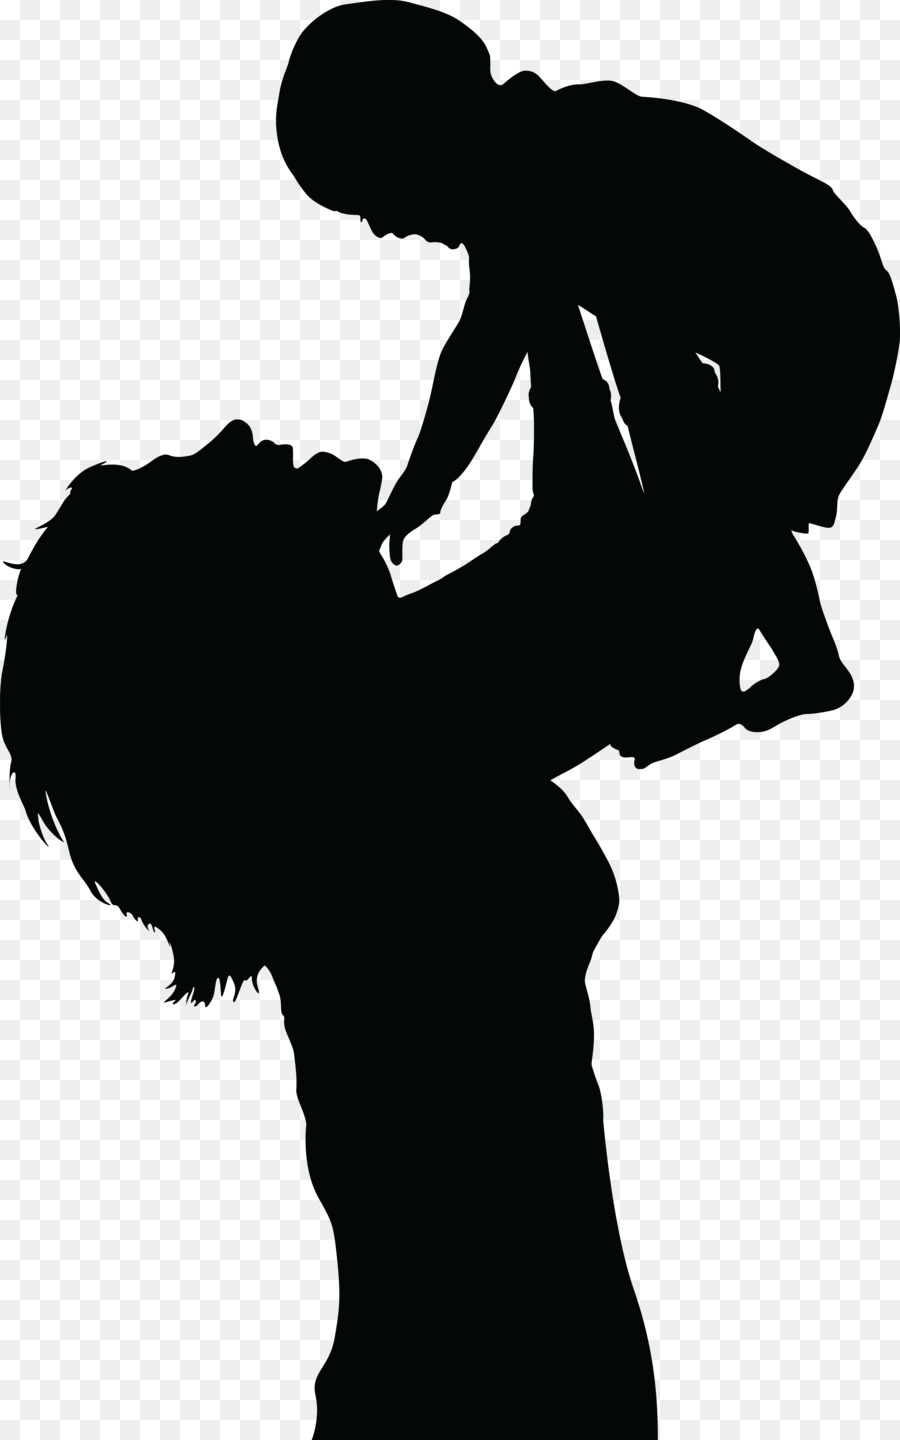 Mother Silhouette Child Clip art - Silhouette png download - 4000*6400 - Free Transparent Mother png Download.